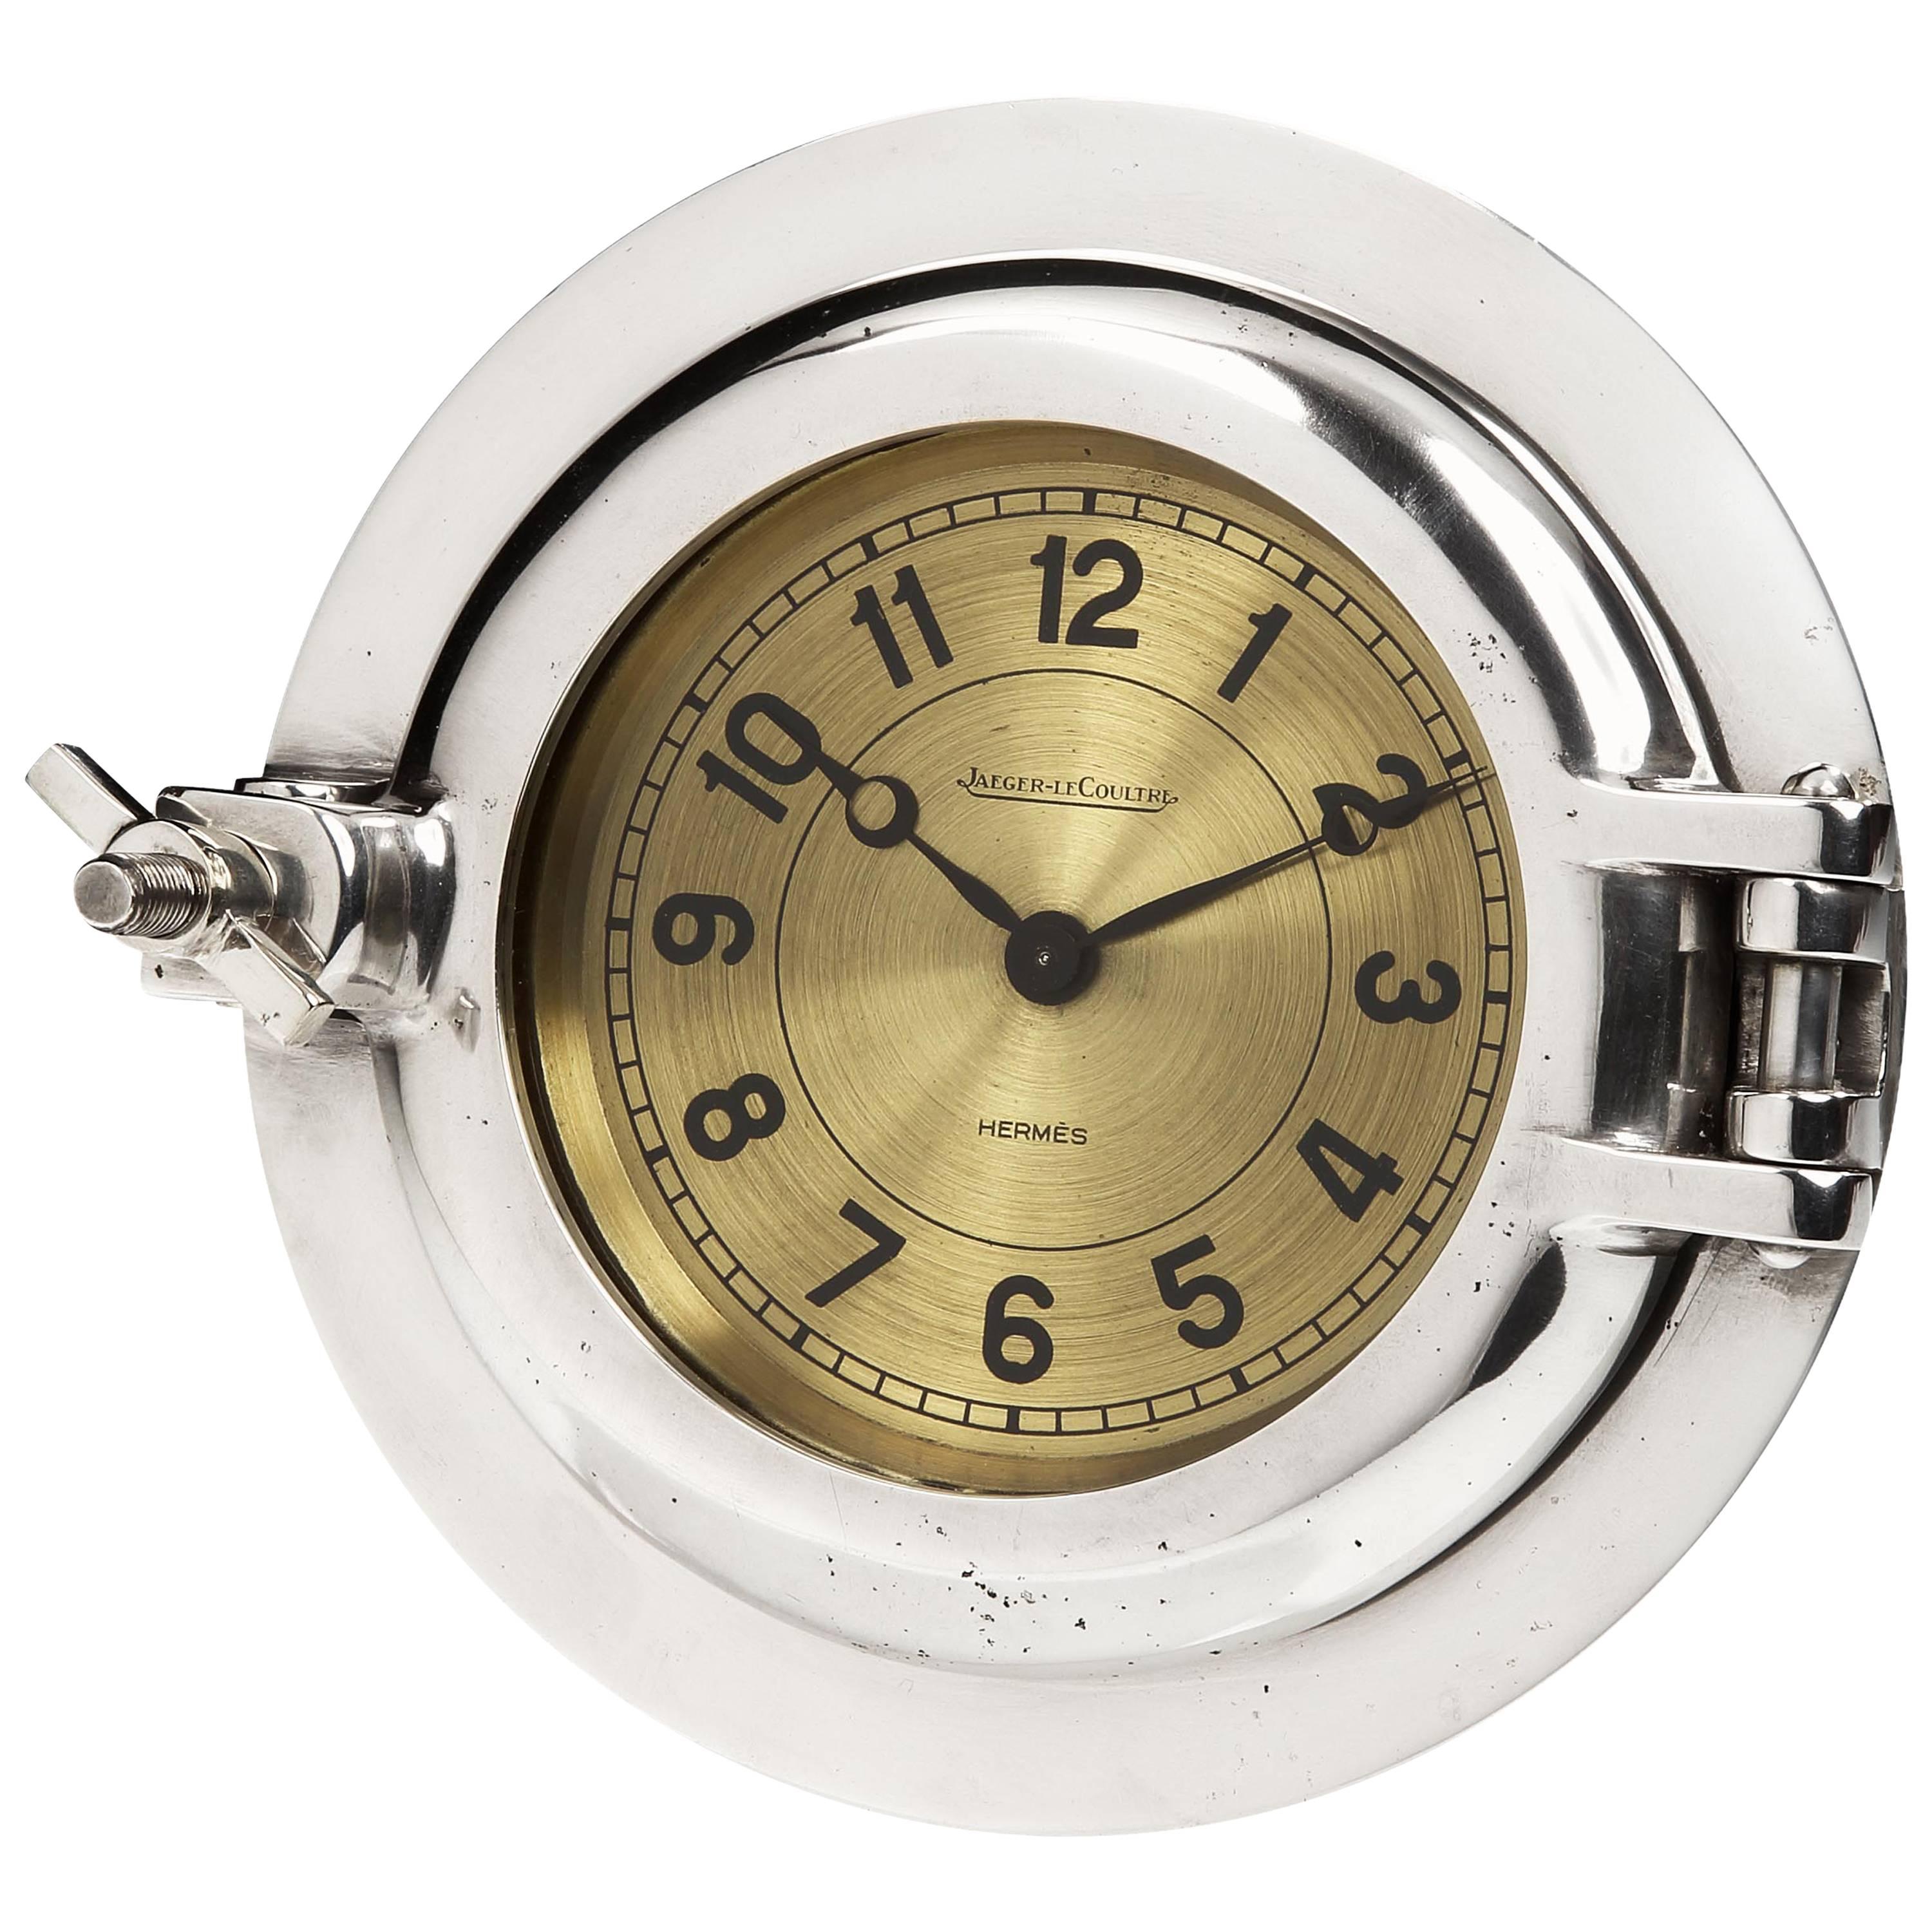 'Porthole' Clock by Jaeger le Coultre for Hermès